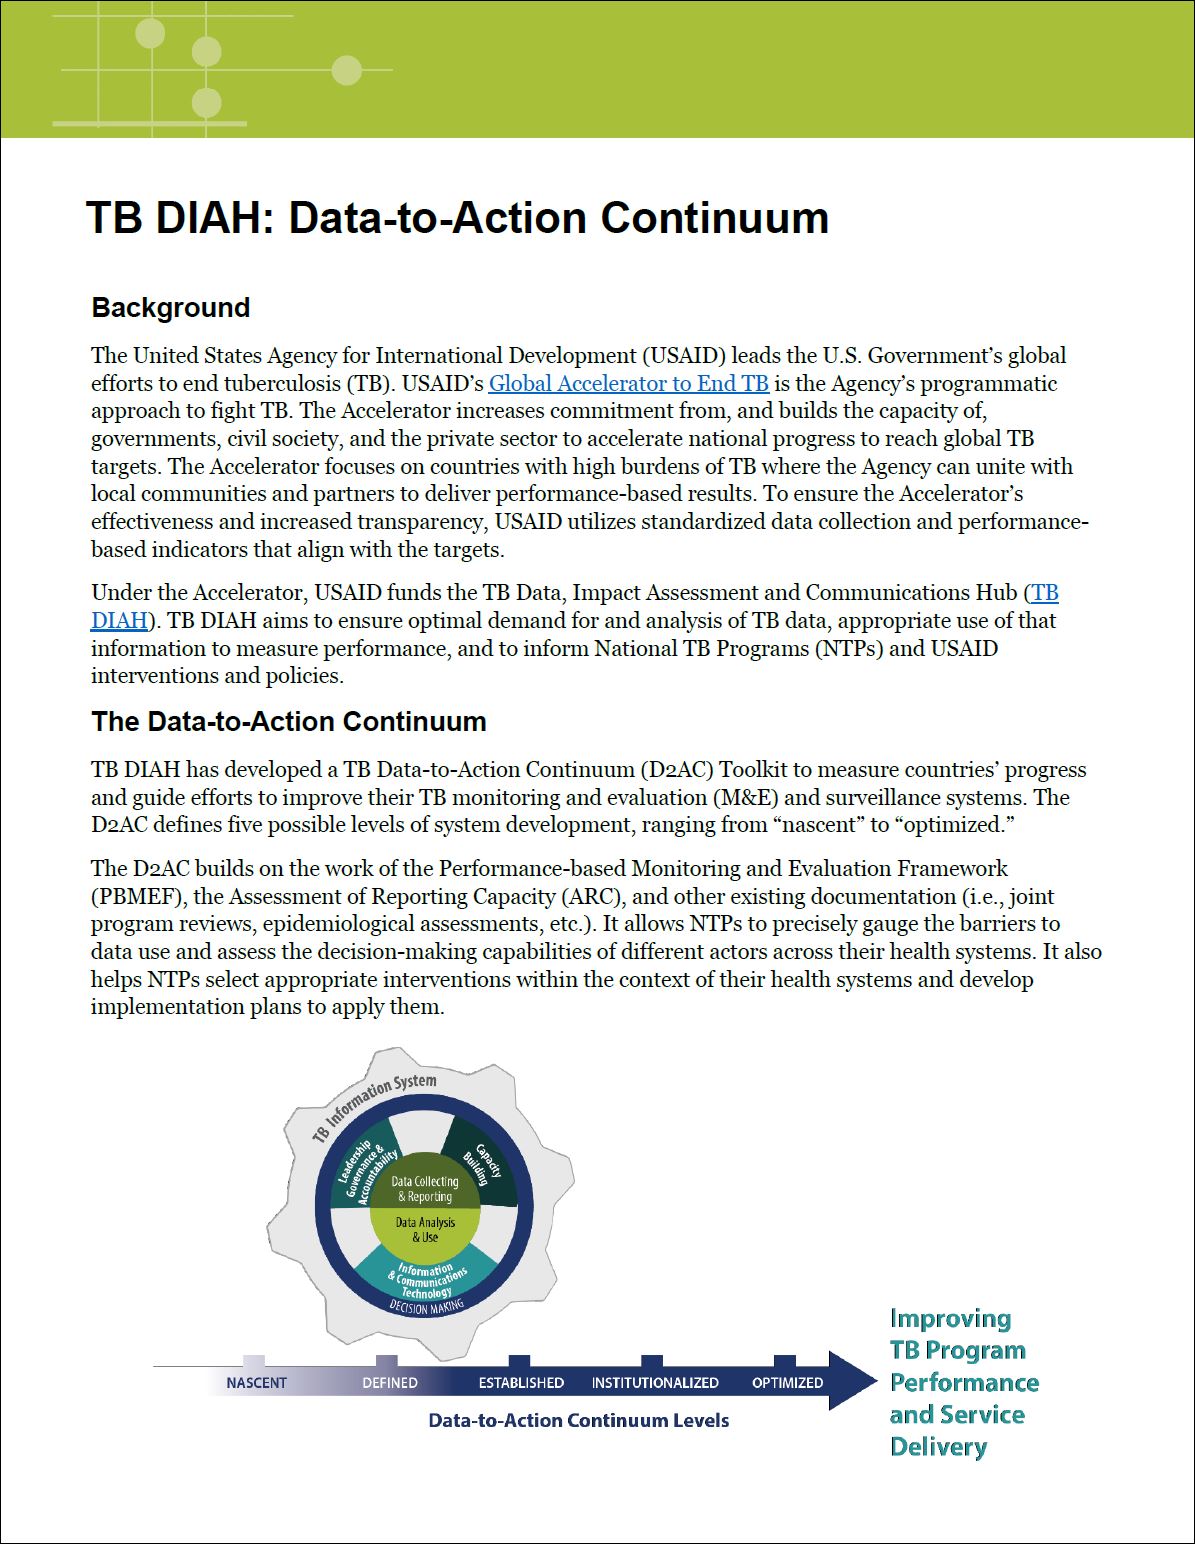 TB DIAH: Data-to-Action Continuum